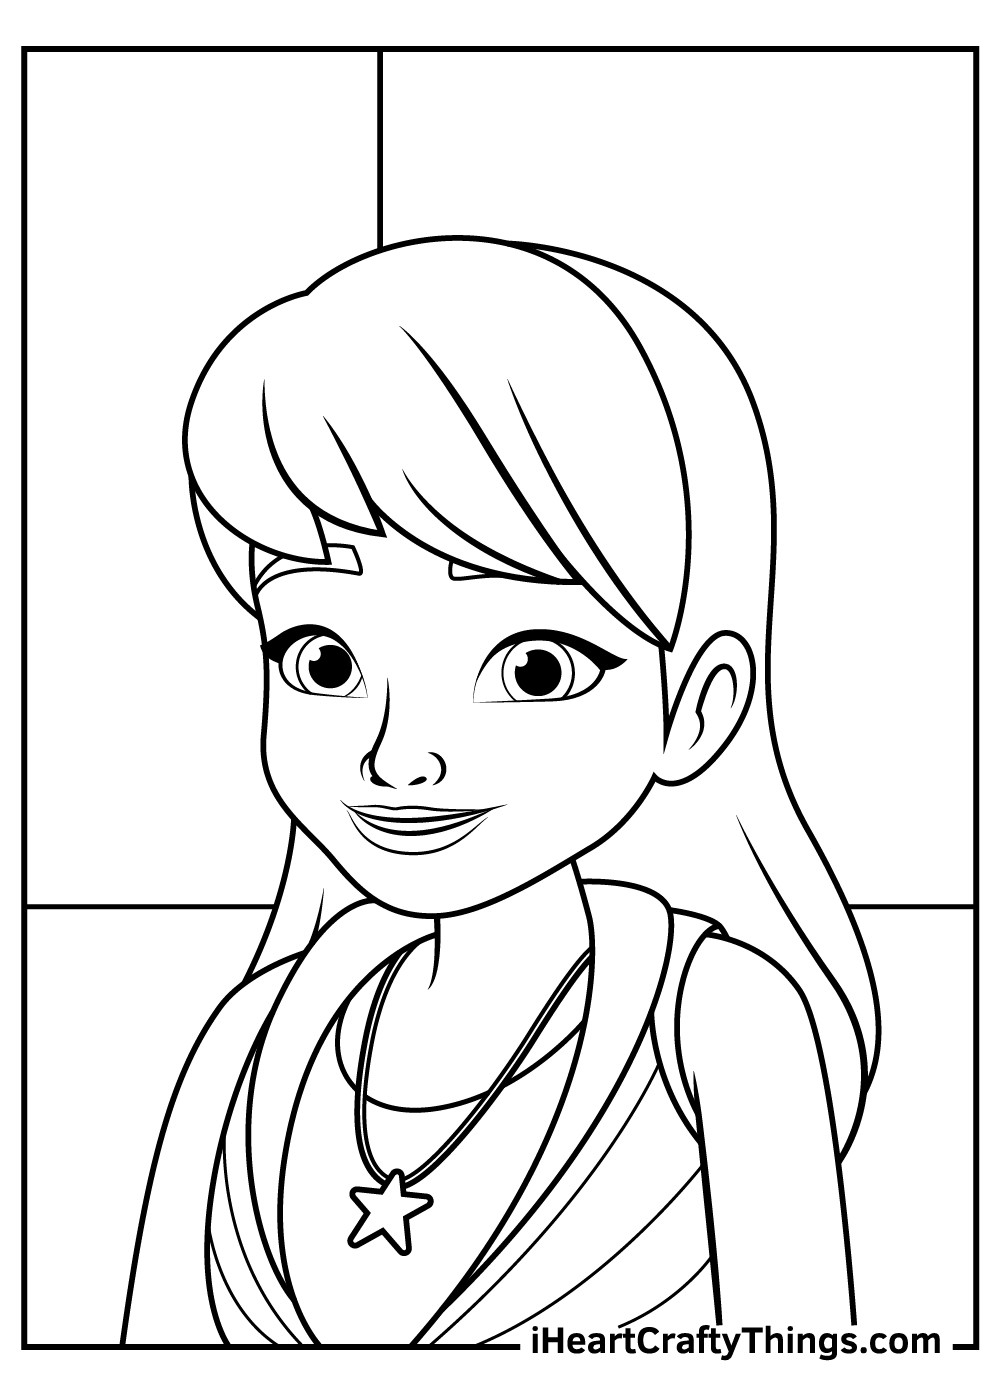 stephanie lego friends coloring pages free printables